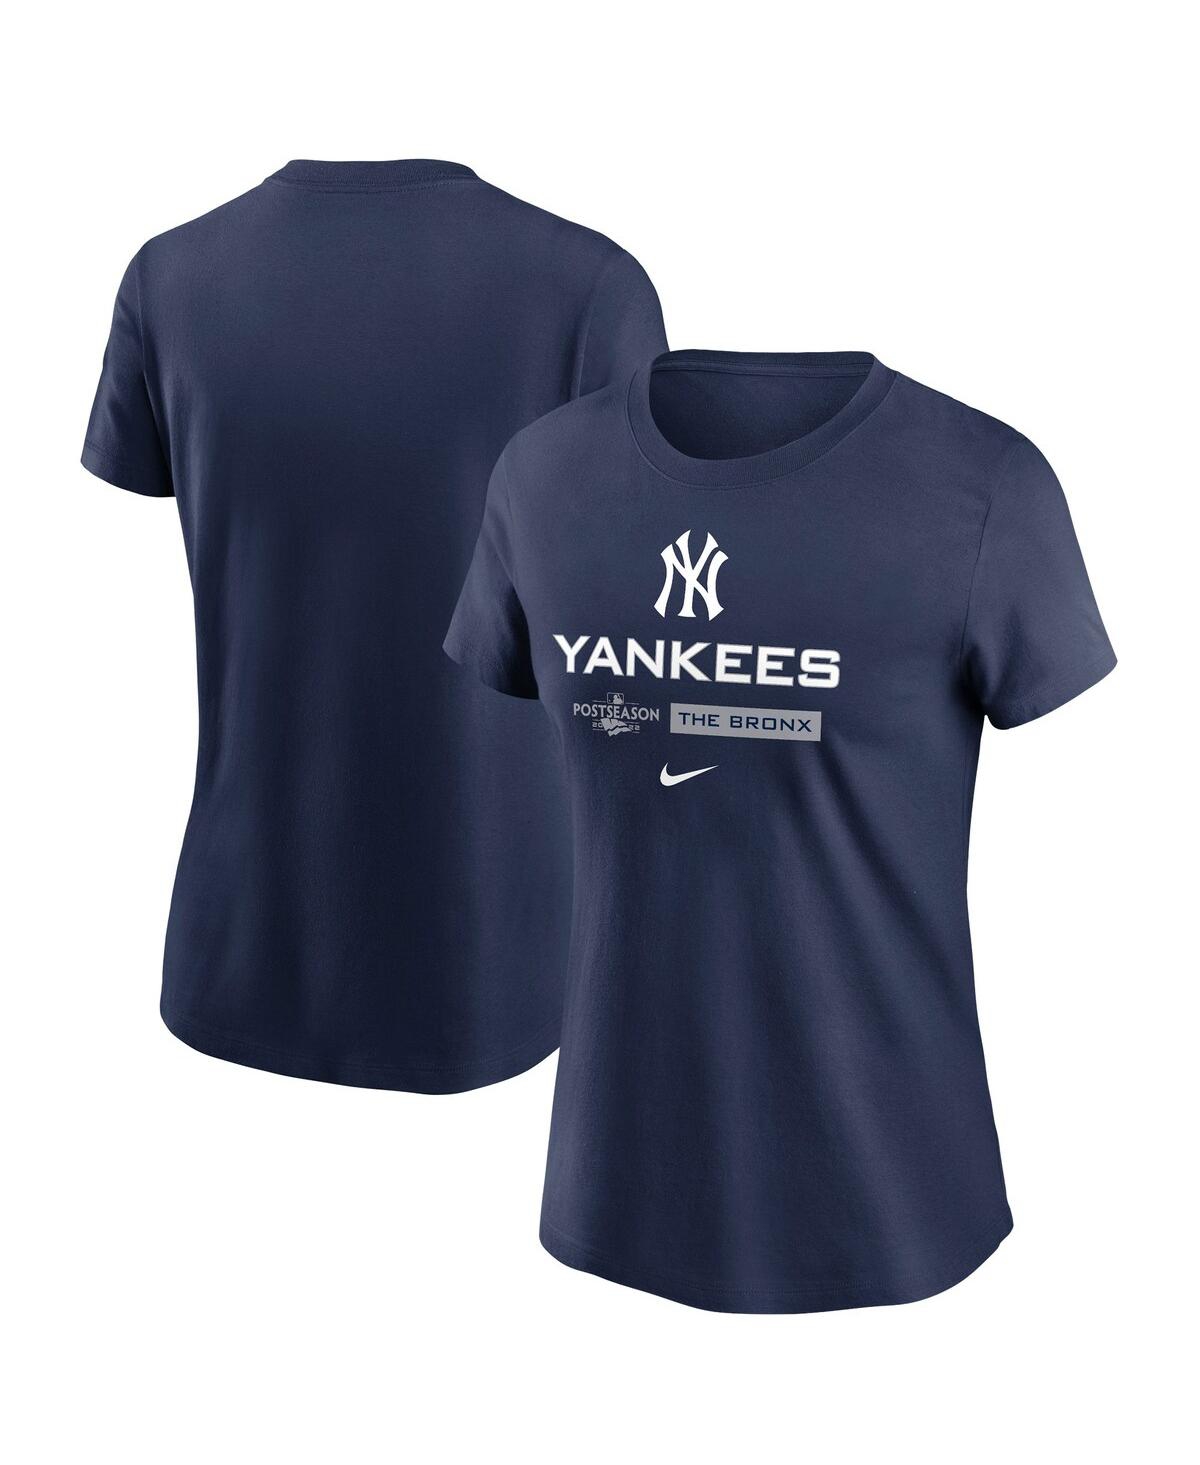 Women's Nike Navy New York Yankees 2022 Postseason Authentic Collection Dugout T-shirt